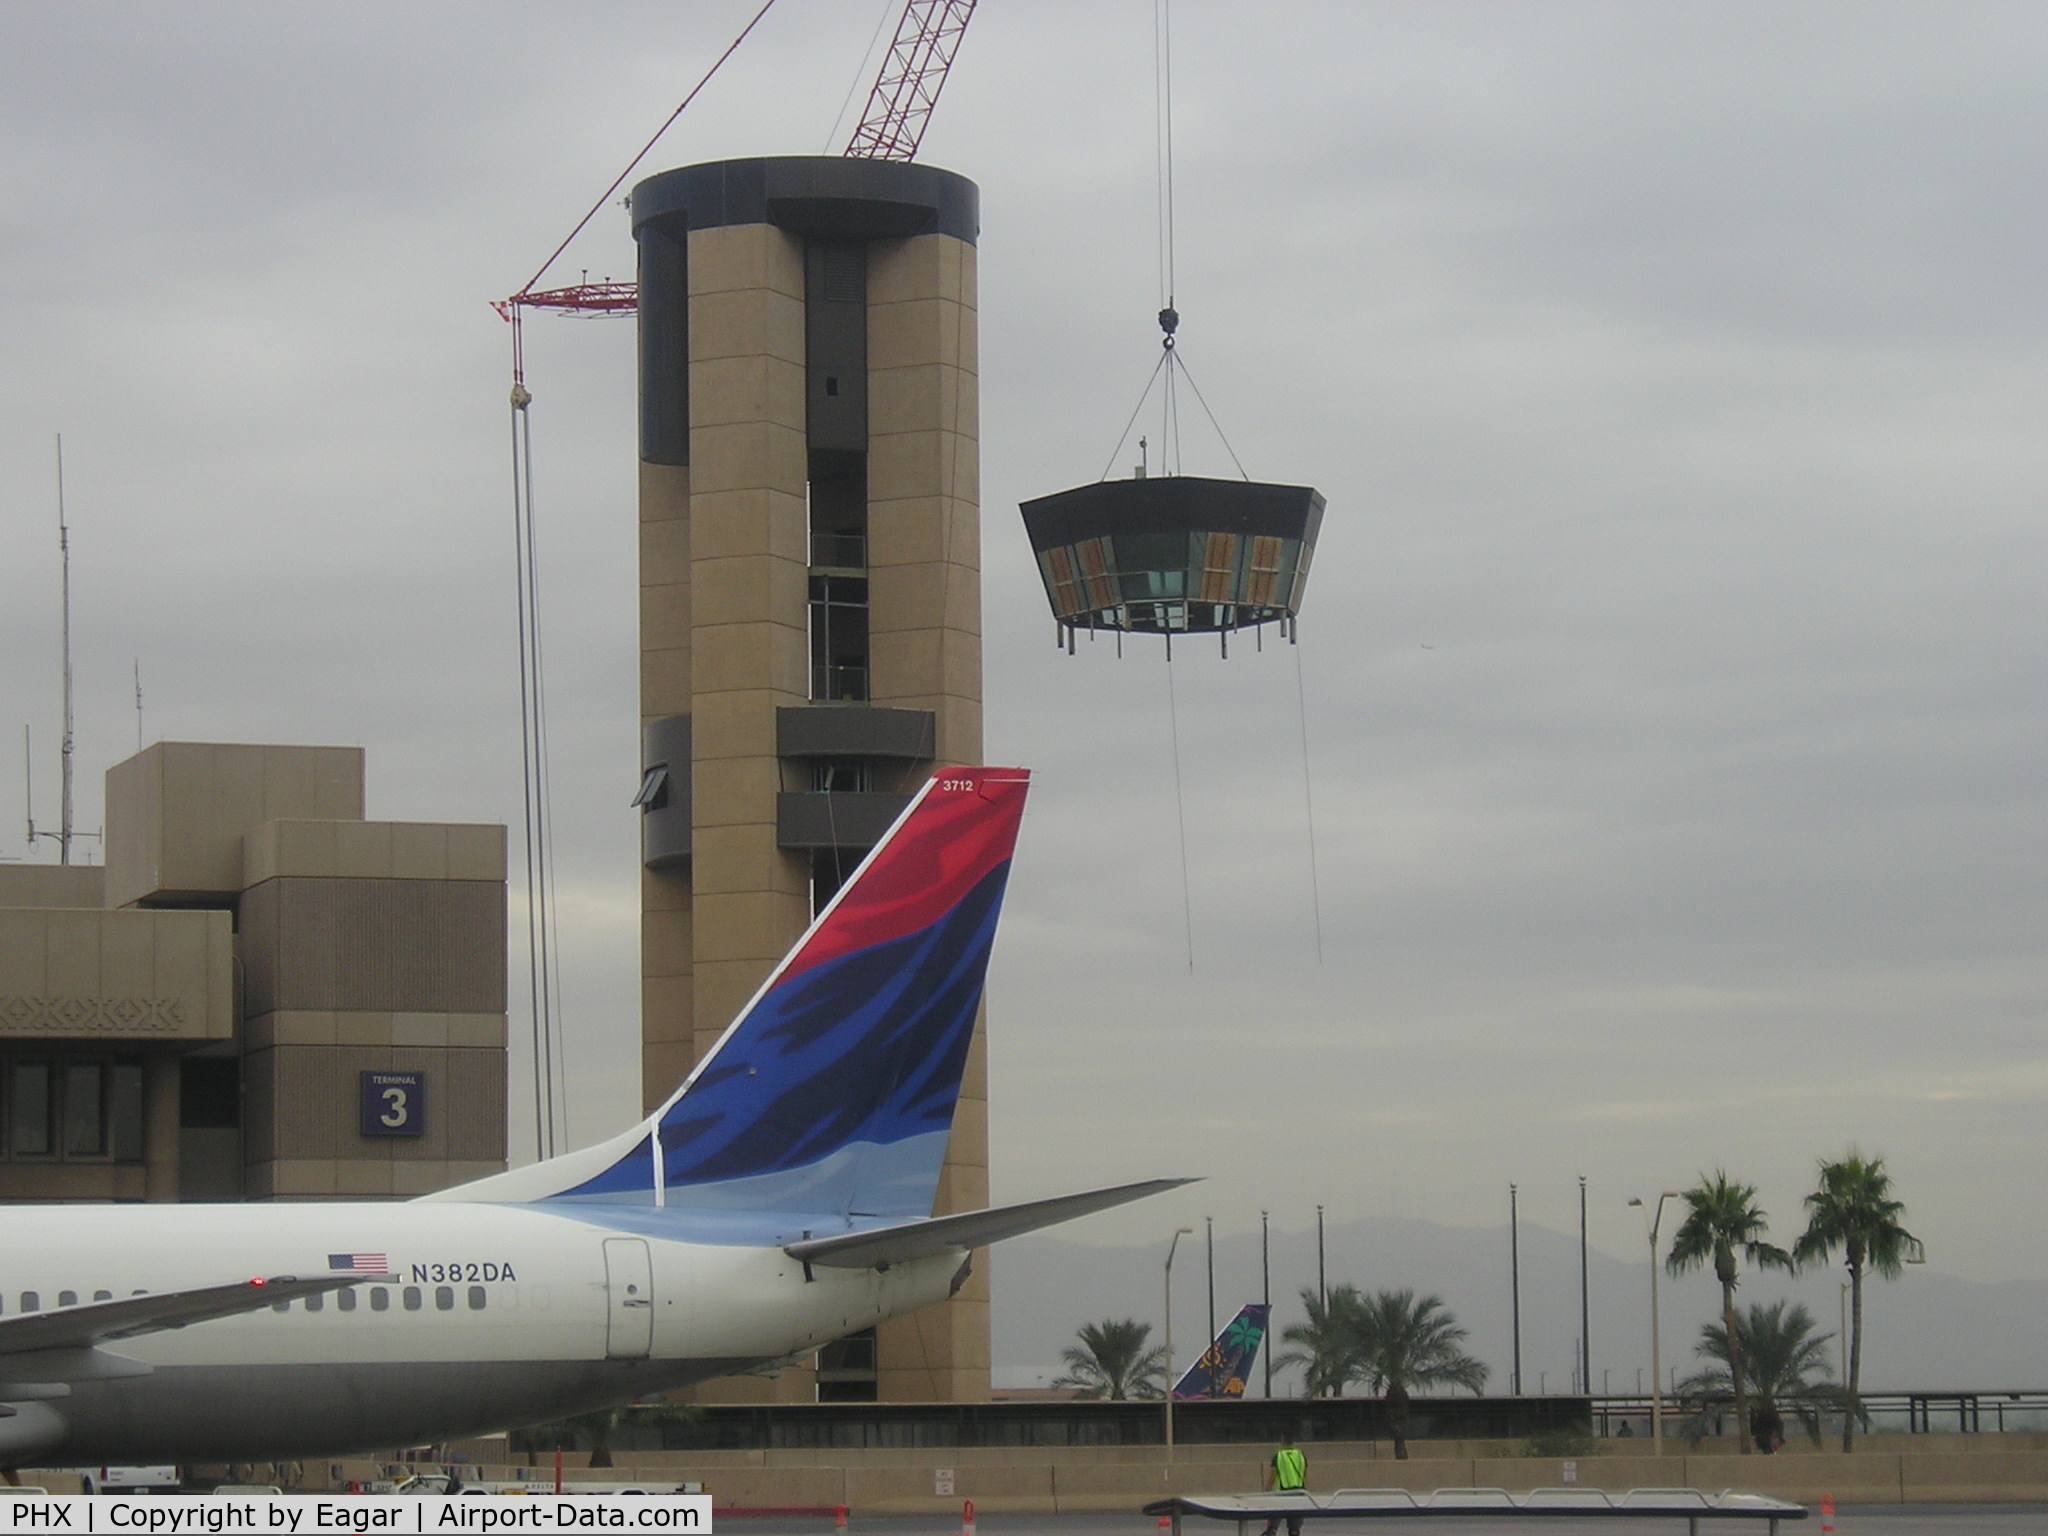 Phoenix Sky Harbor International Airport (PHX) - Down comes the old tower